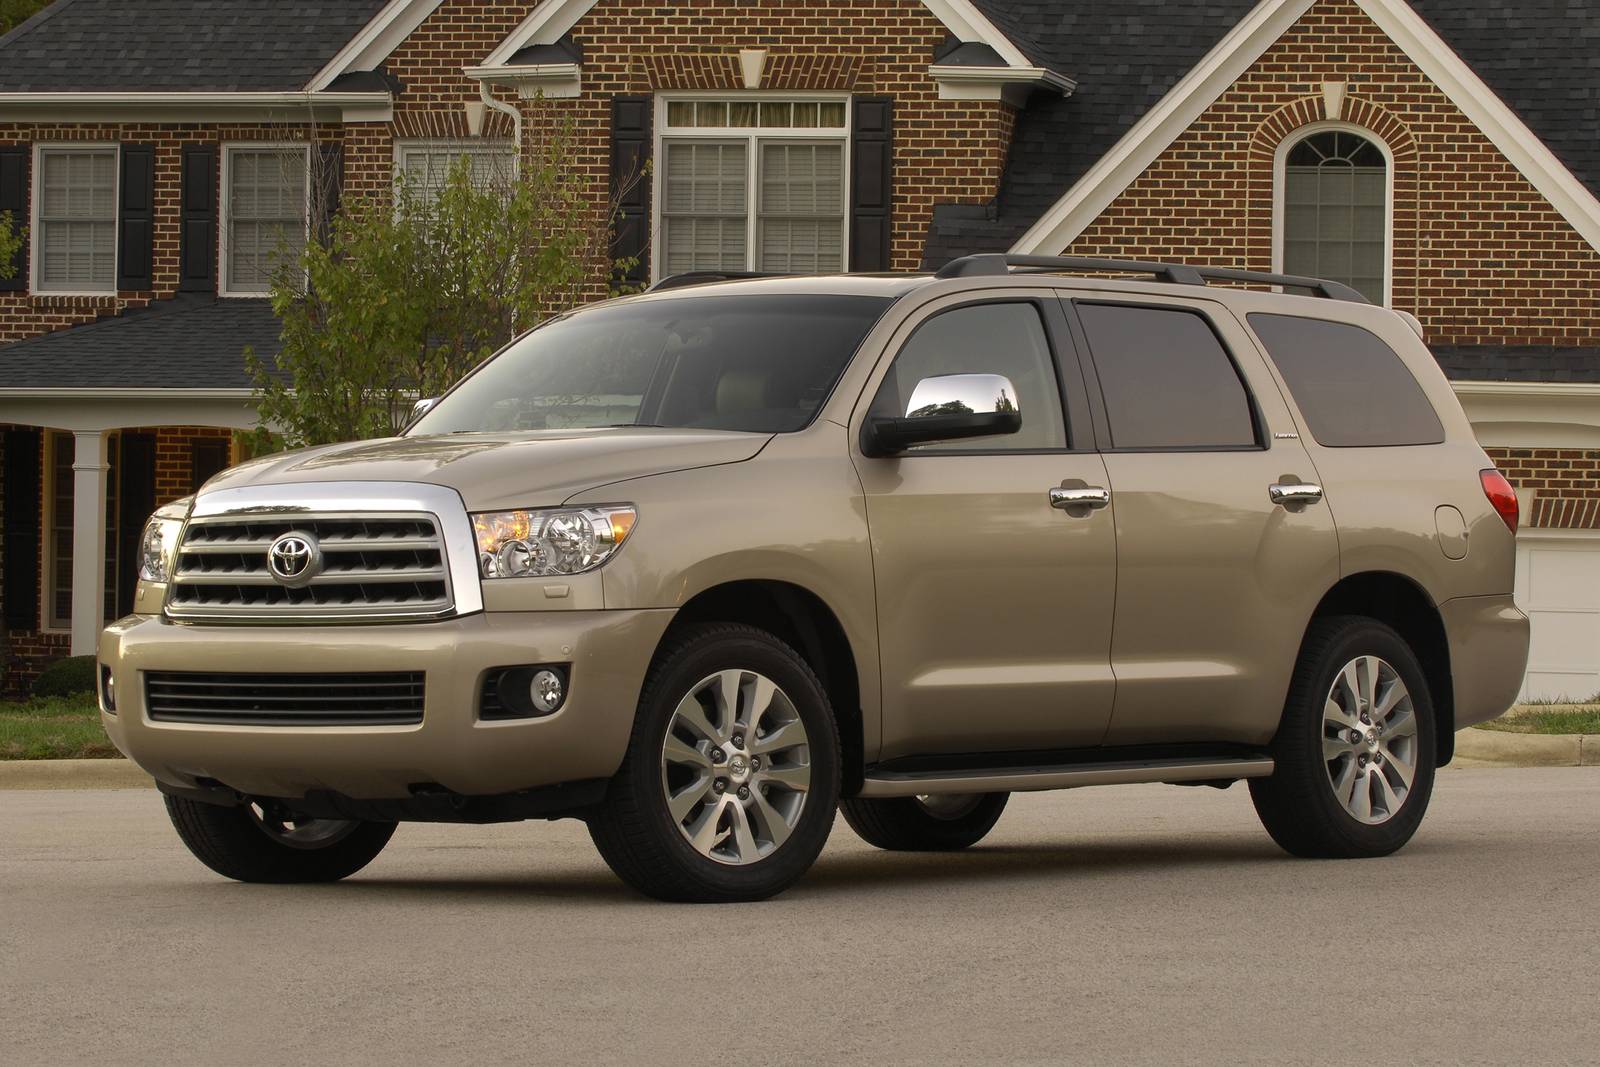 2009 Toyota Sequoia Review & Ratings | Edmunds